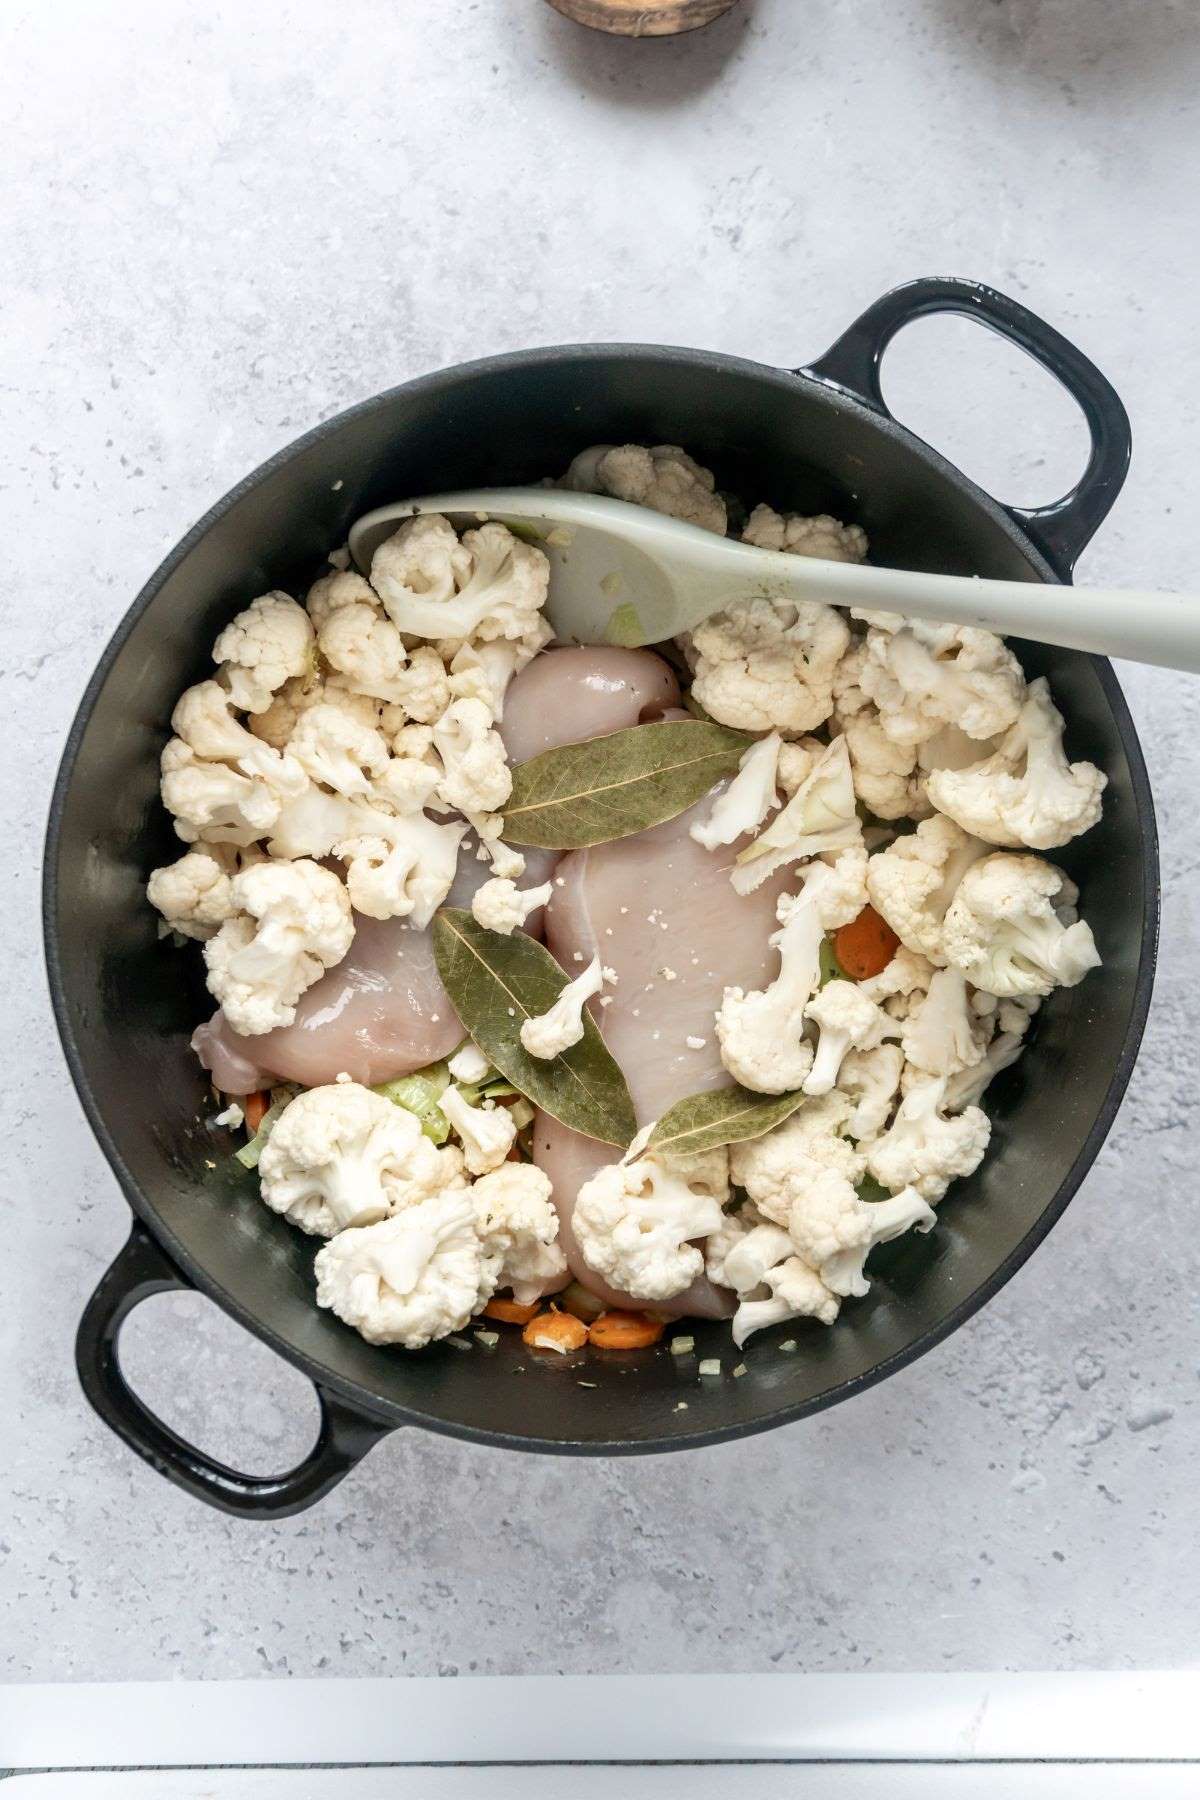 Veggies, raw chicken breasts, cauliflower florets, and bay leaves in a large black stock pot.